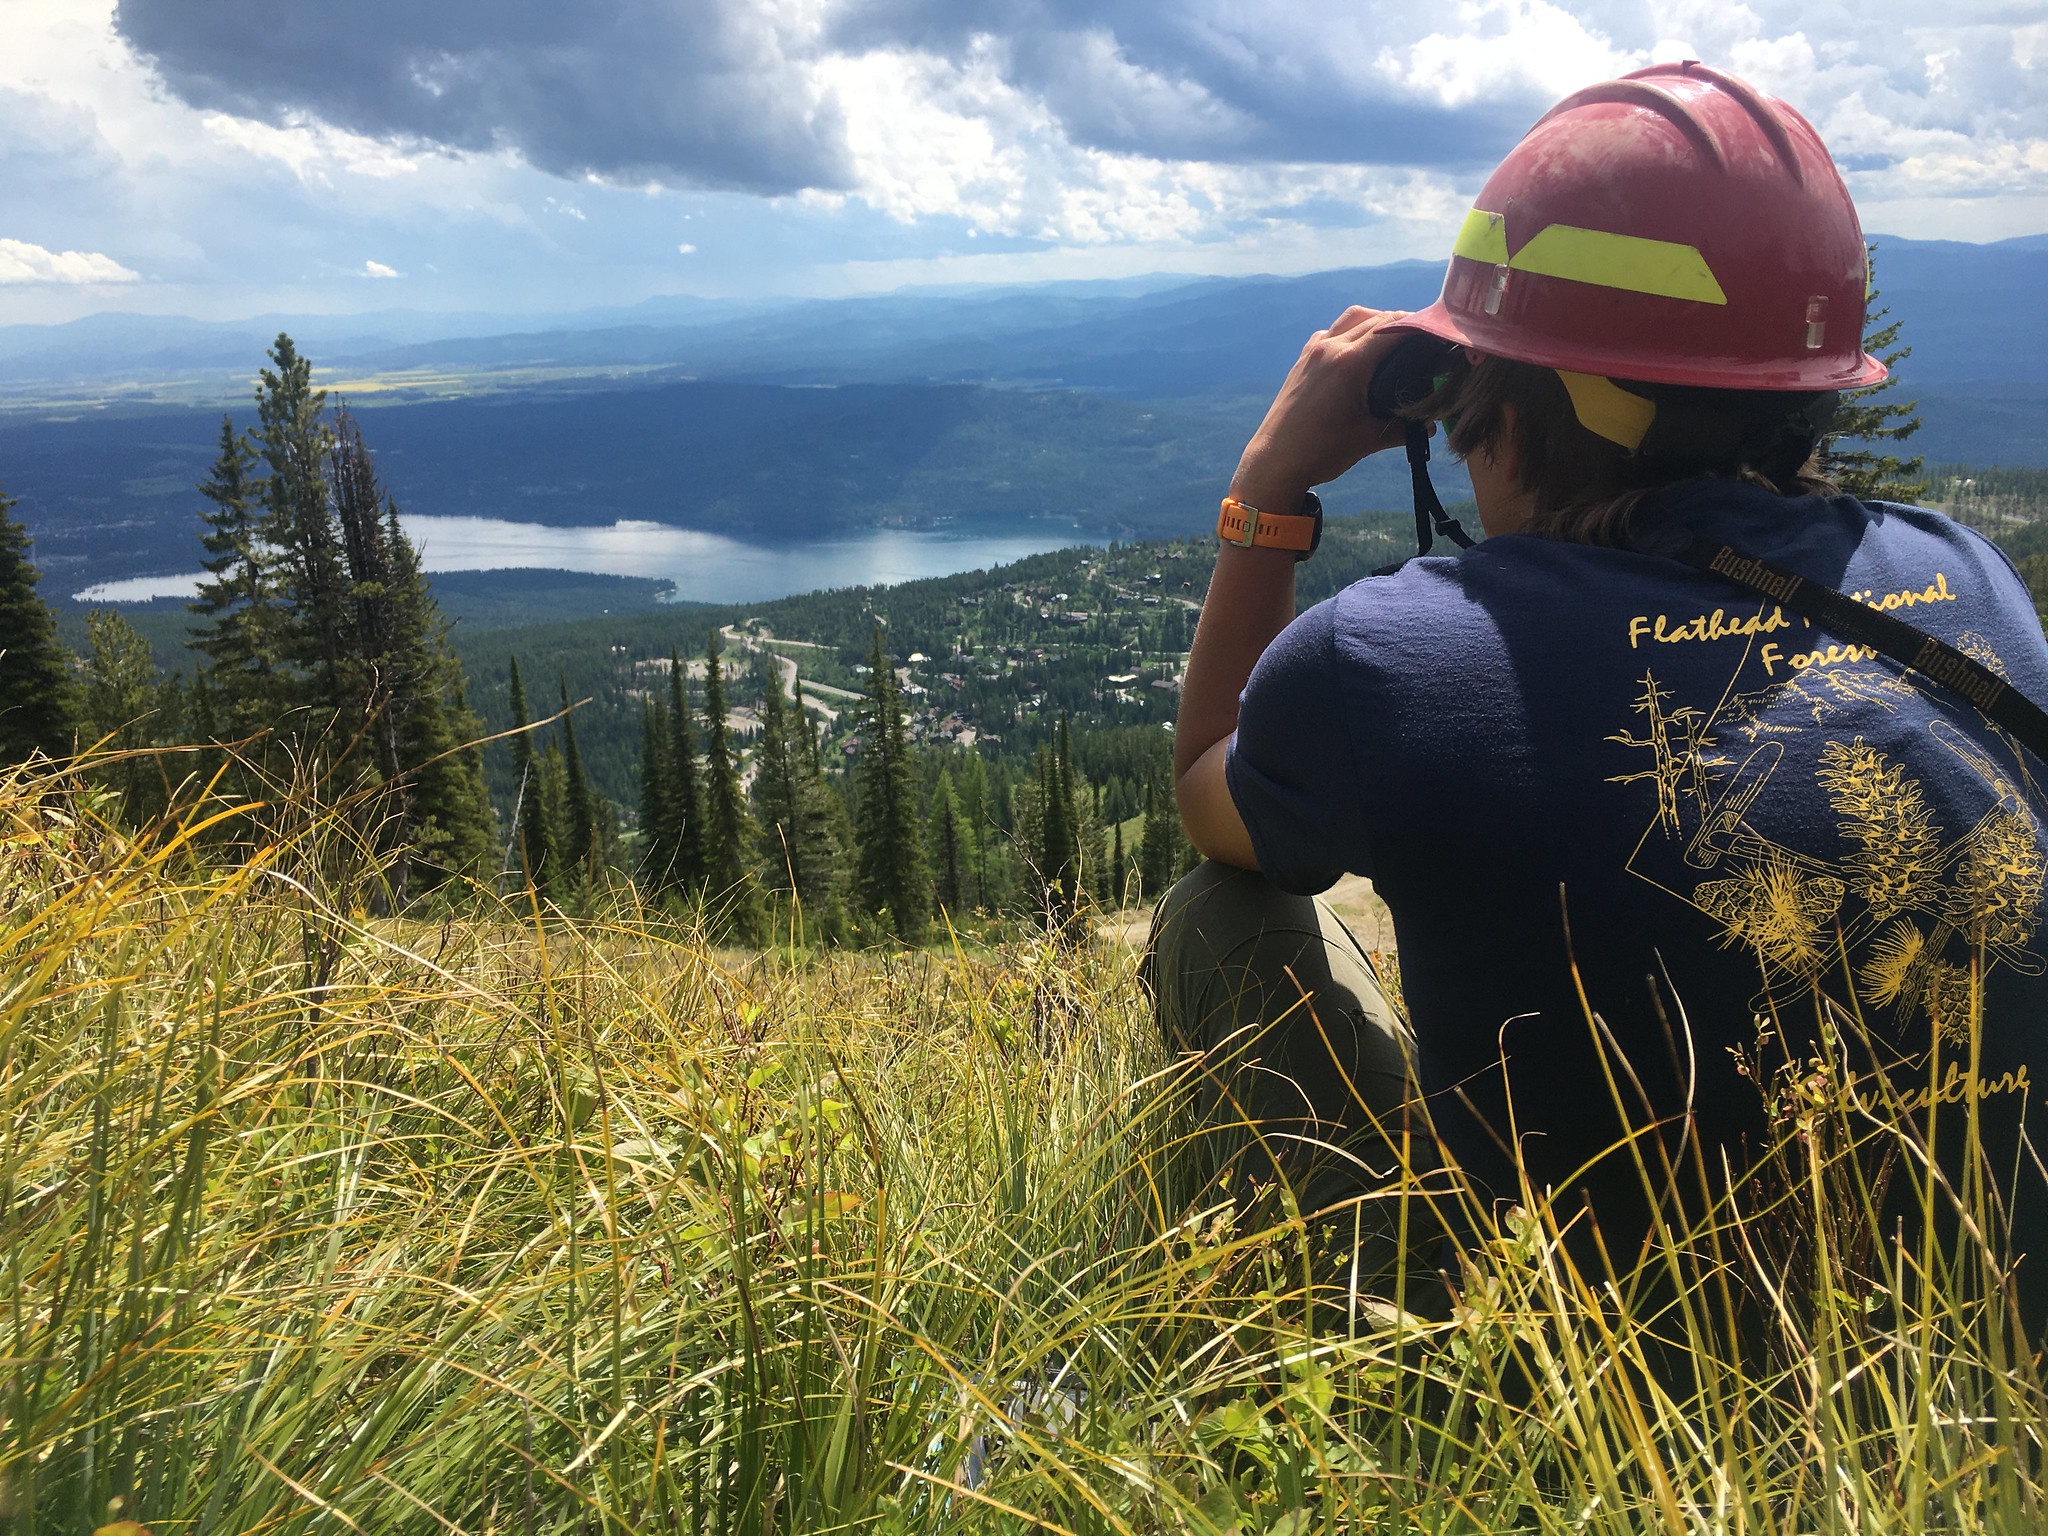 A member of the silviculture crew scans the top of the trees with binoculars to see how many cones have been produced this year in performing whitebark pine cone assessment on the top of Big Mountain, Flathead National Forest, Montana. USDA Forest Service photo by Erika Williams.